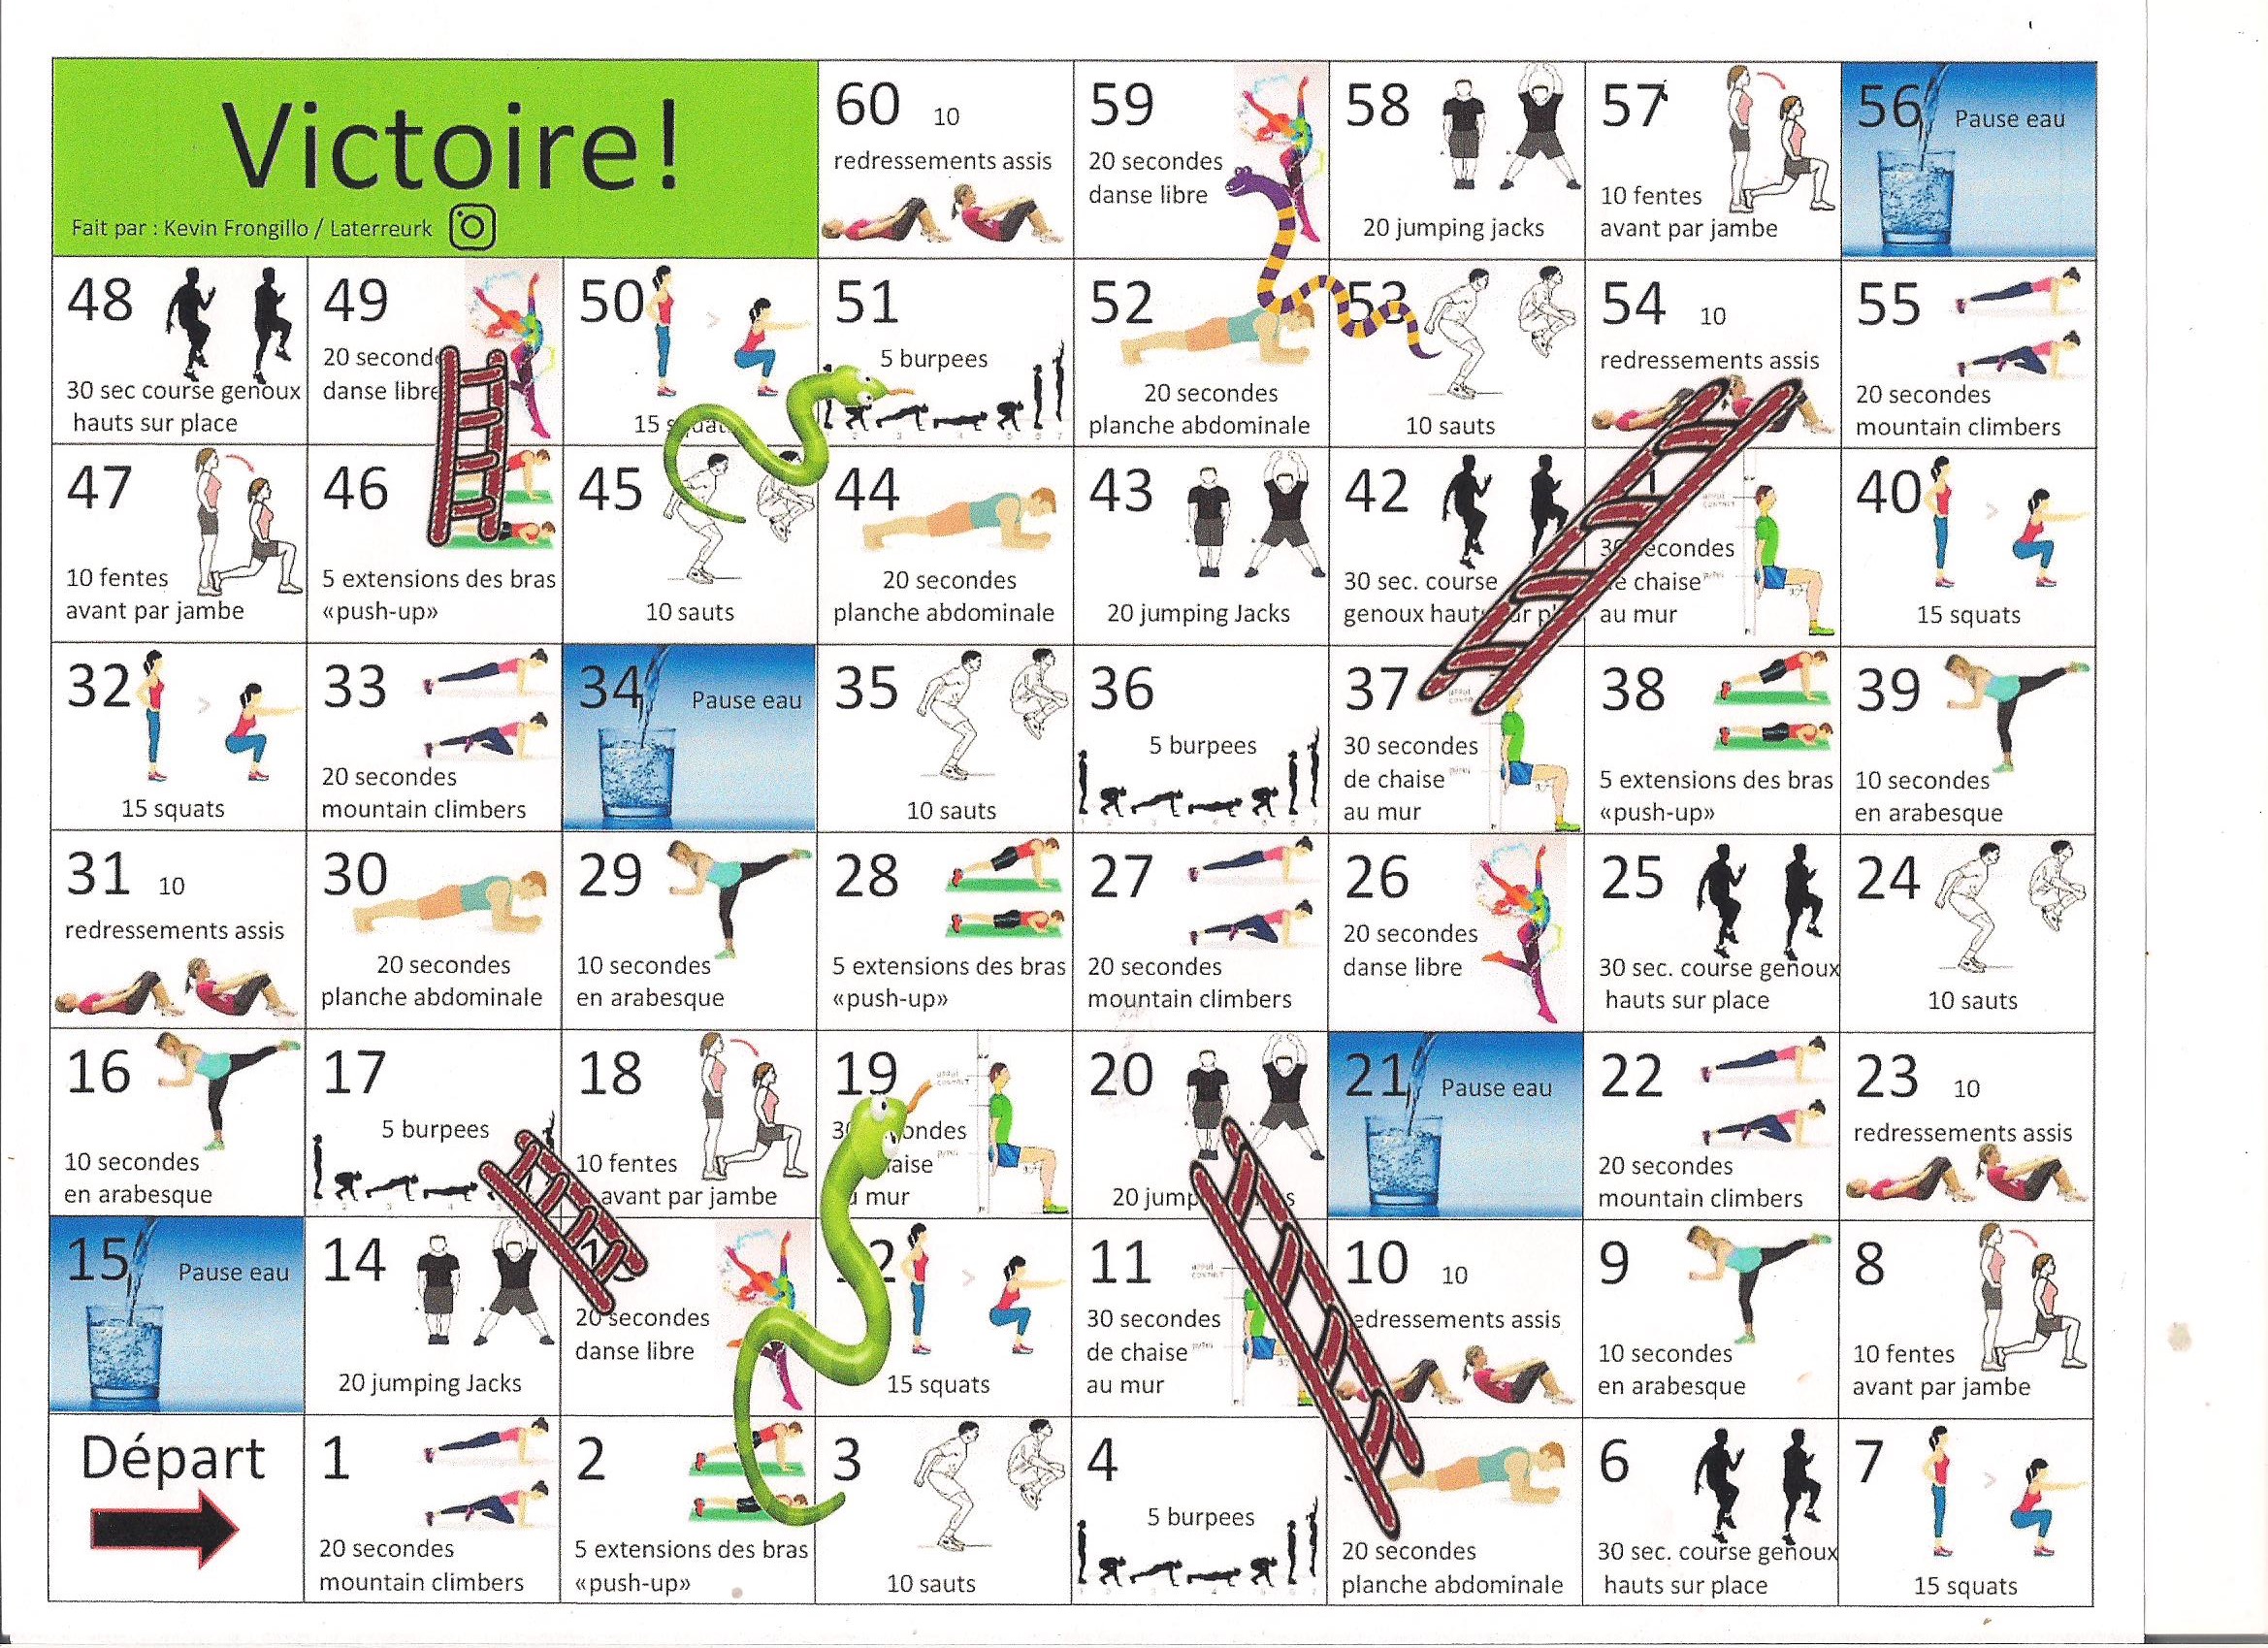 Snakes and Ladders games with corresponding exercises for each square